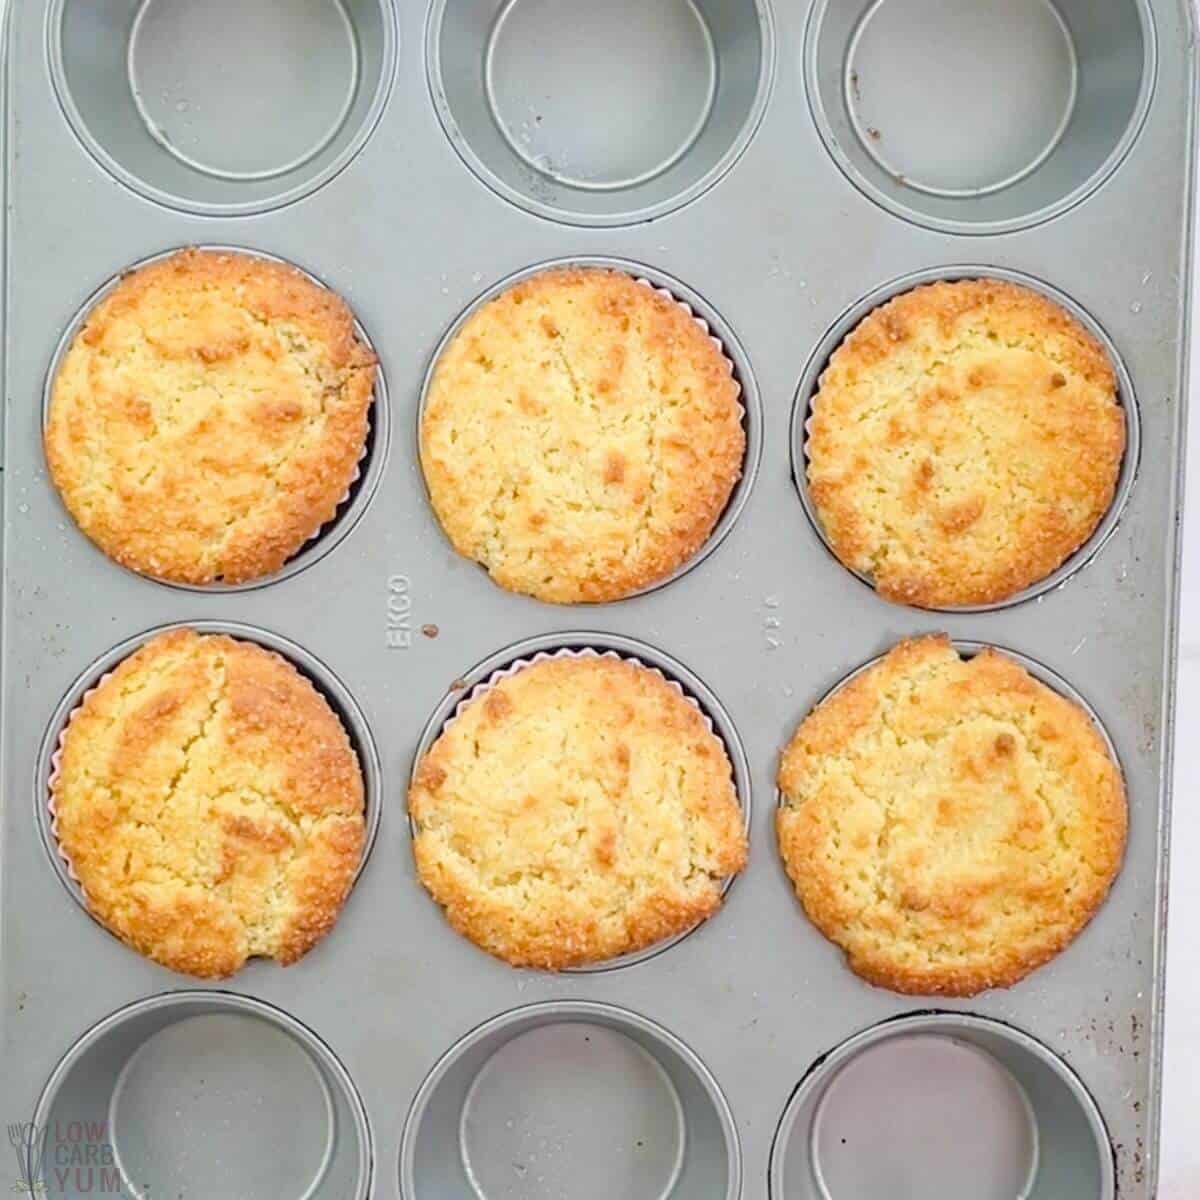 baked muffins in baking pan.